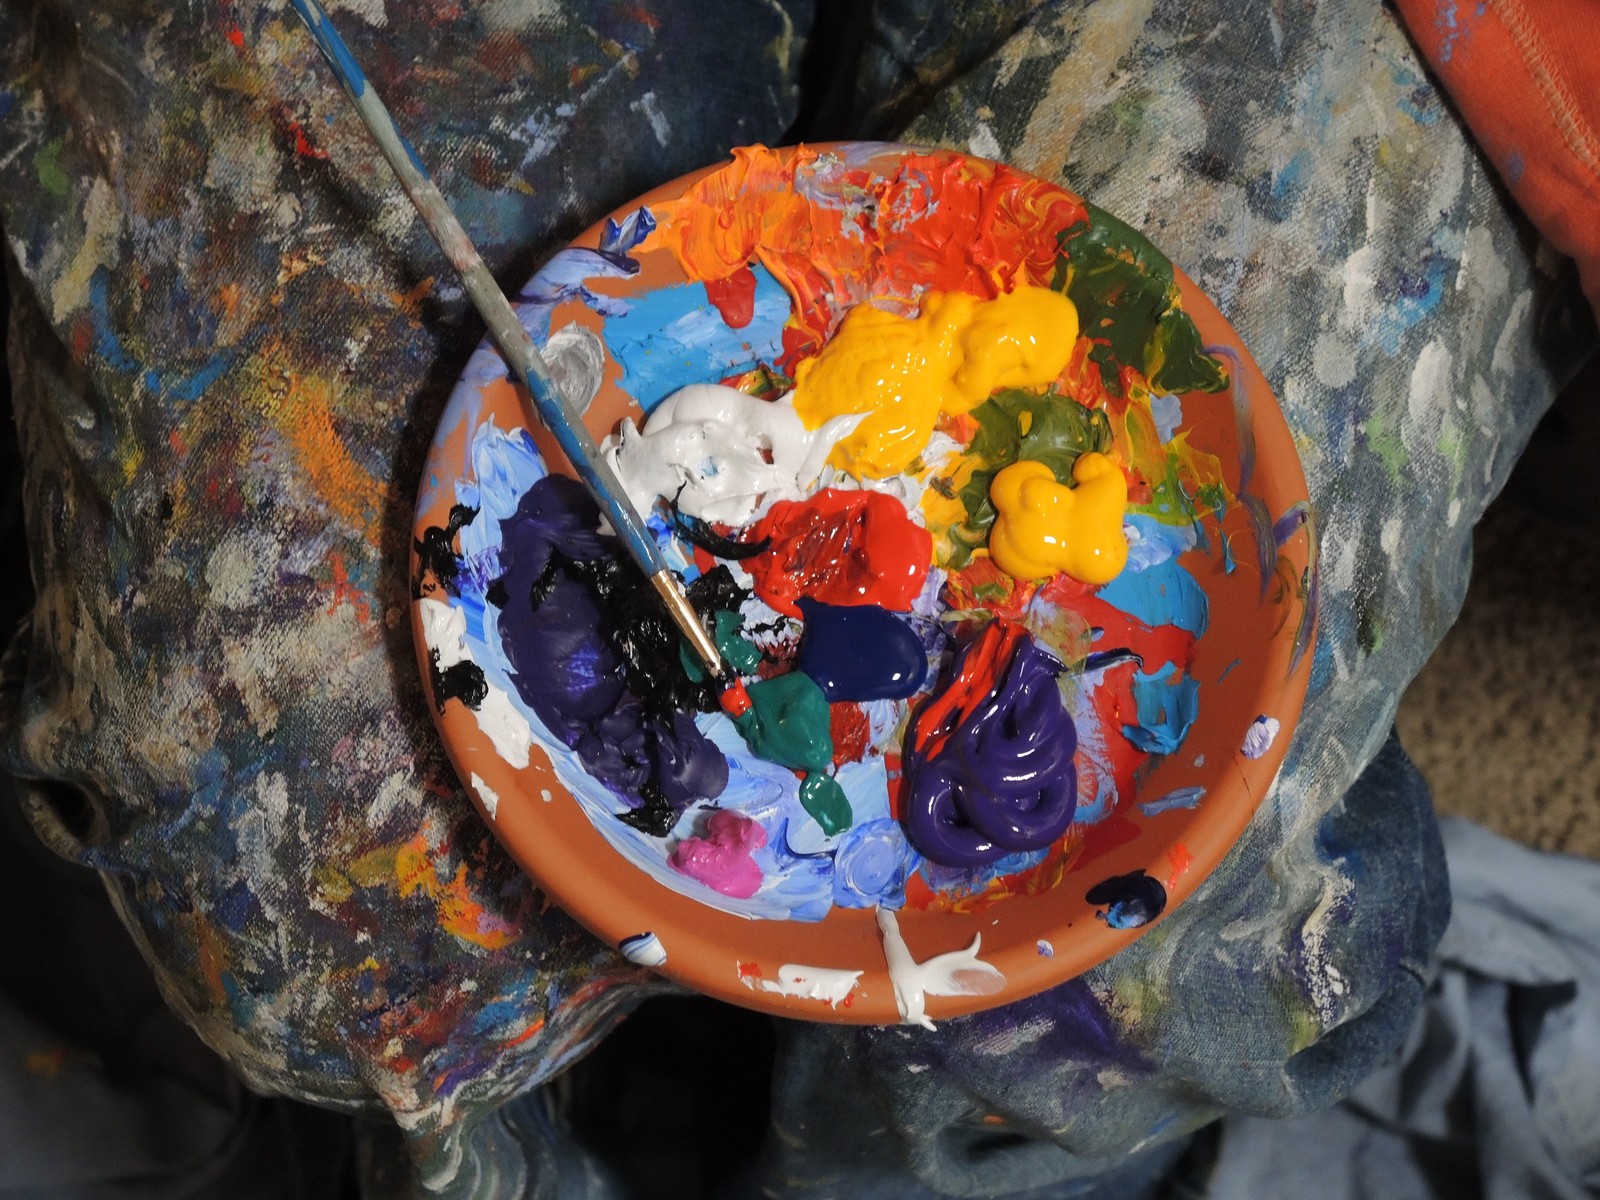 Children's Painting Workshop: Grief Encounter at Colston Hall Workshop Space 1